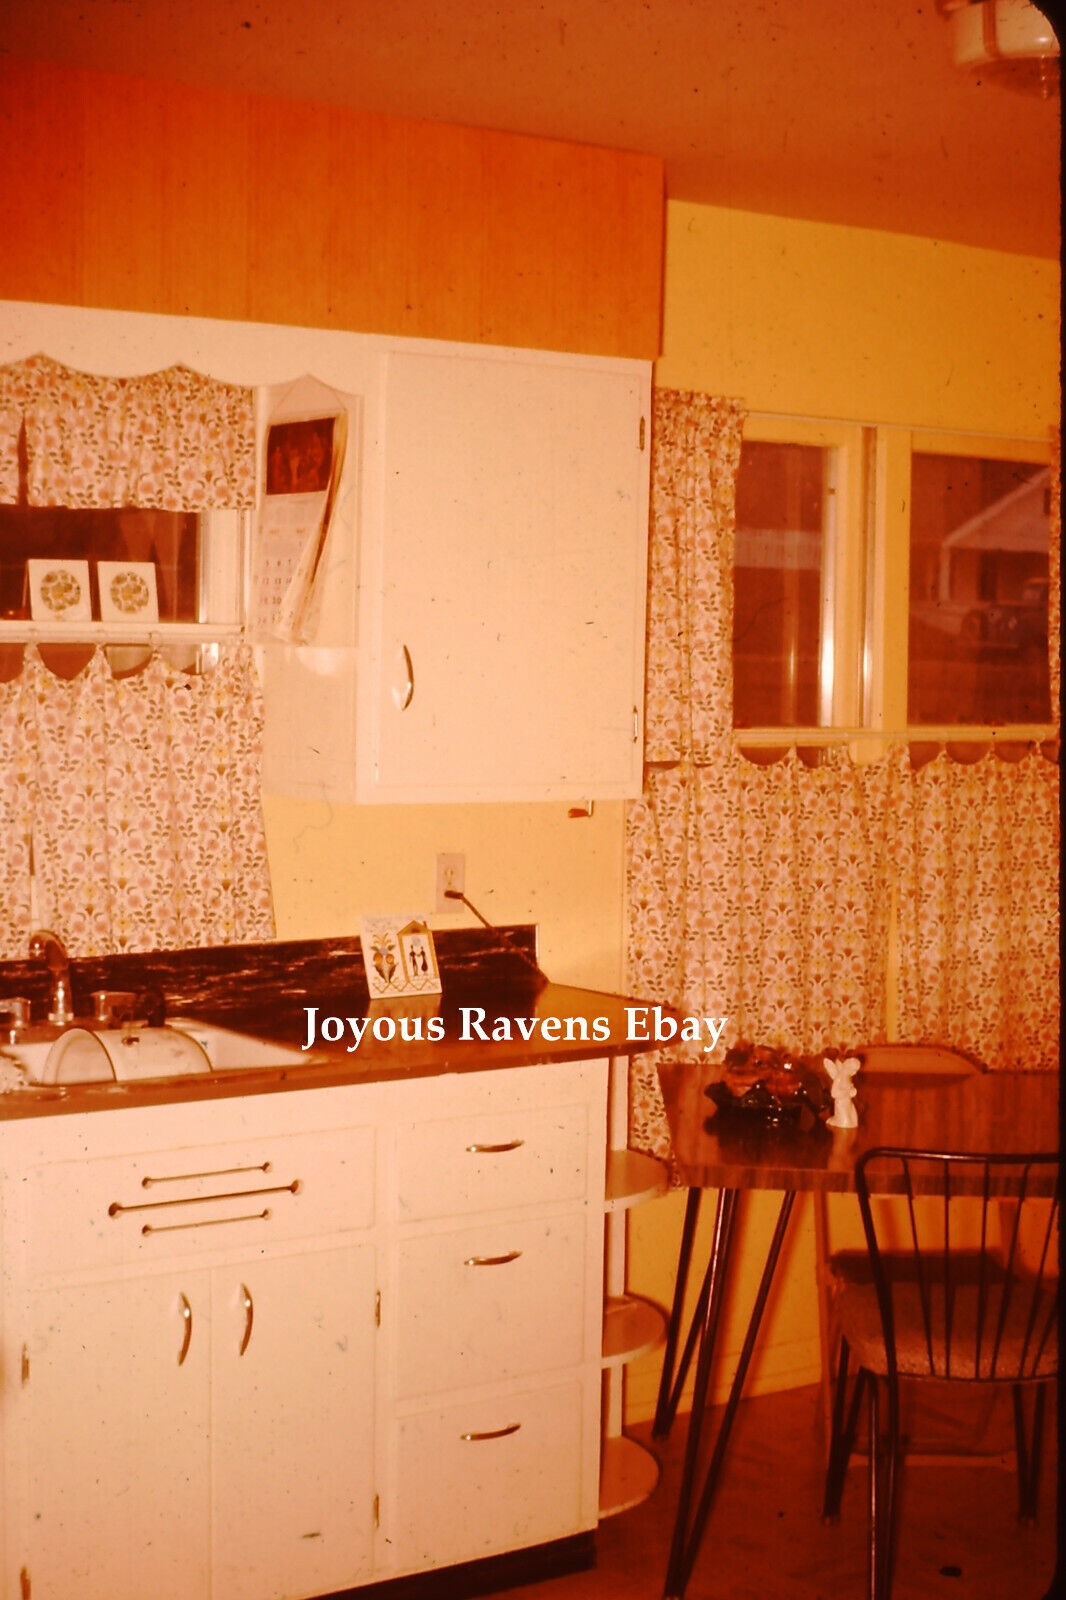 35MM Found Photo Slide 1950s Era Kitchen Cabinet Sink Curtains Table and Chairs